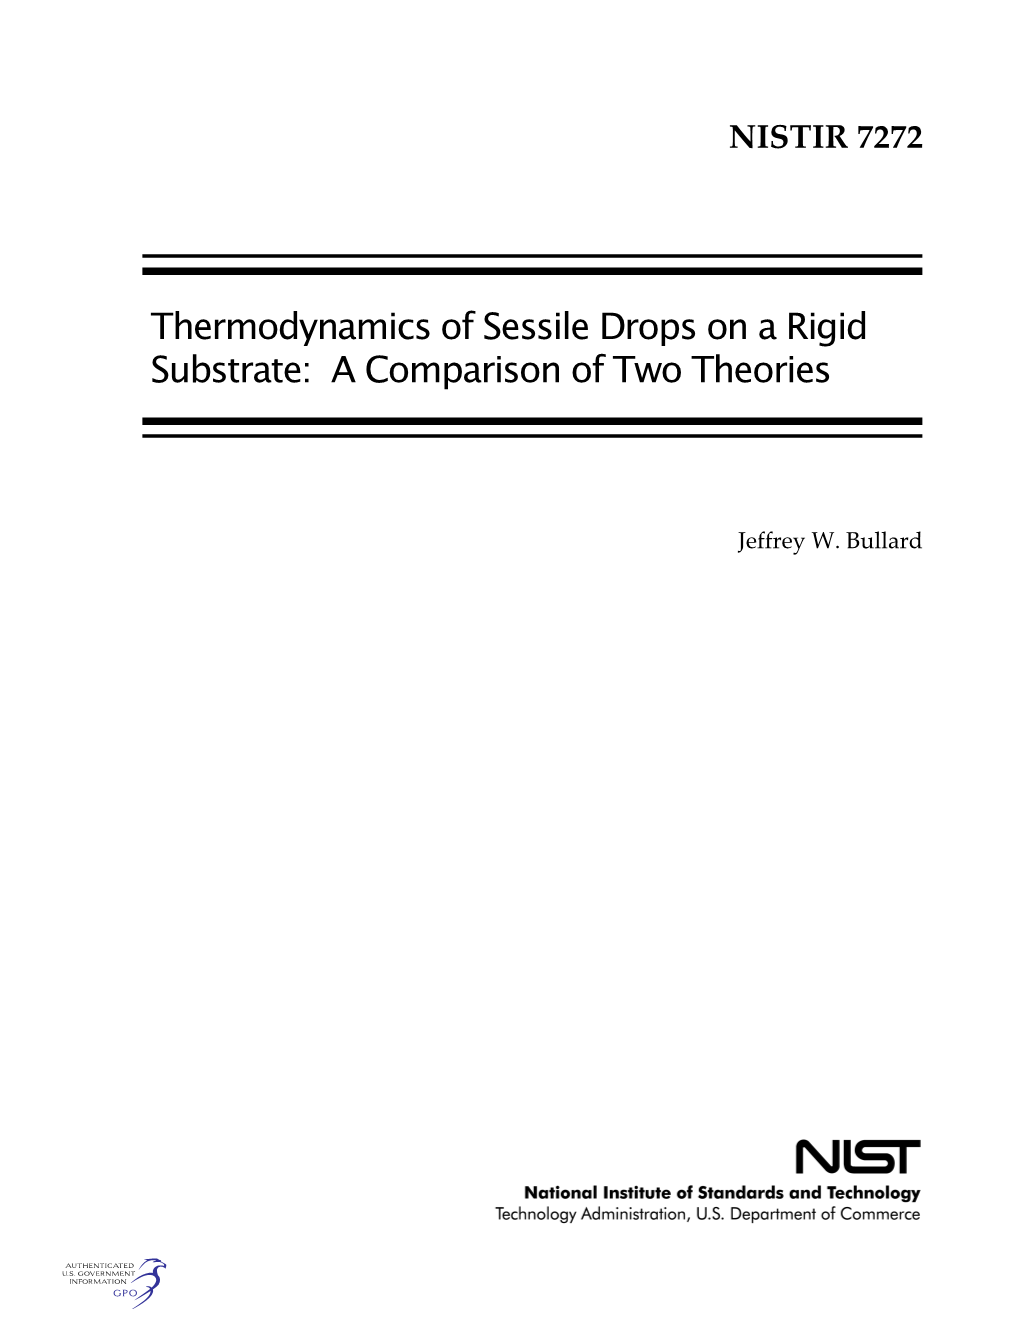 Thermodynamics of Sessile Drops on a Rigid Substrate: a Comparison of Two Theories